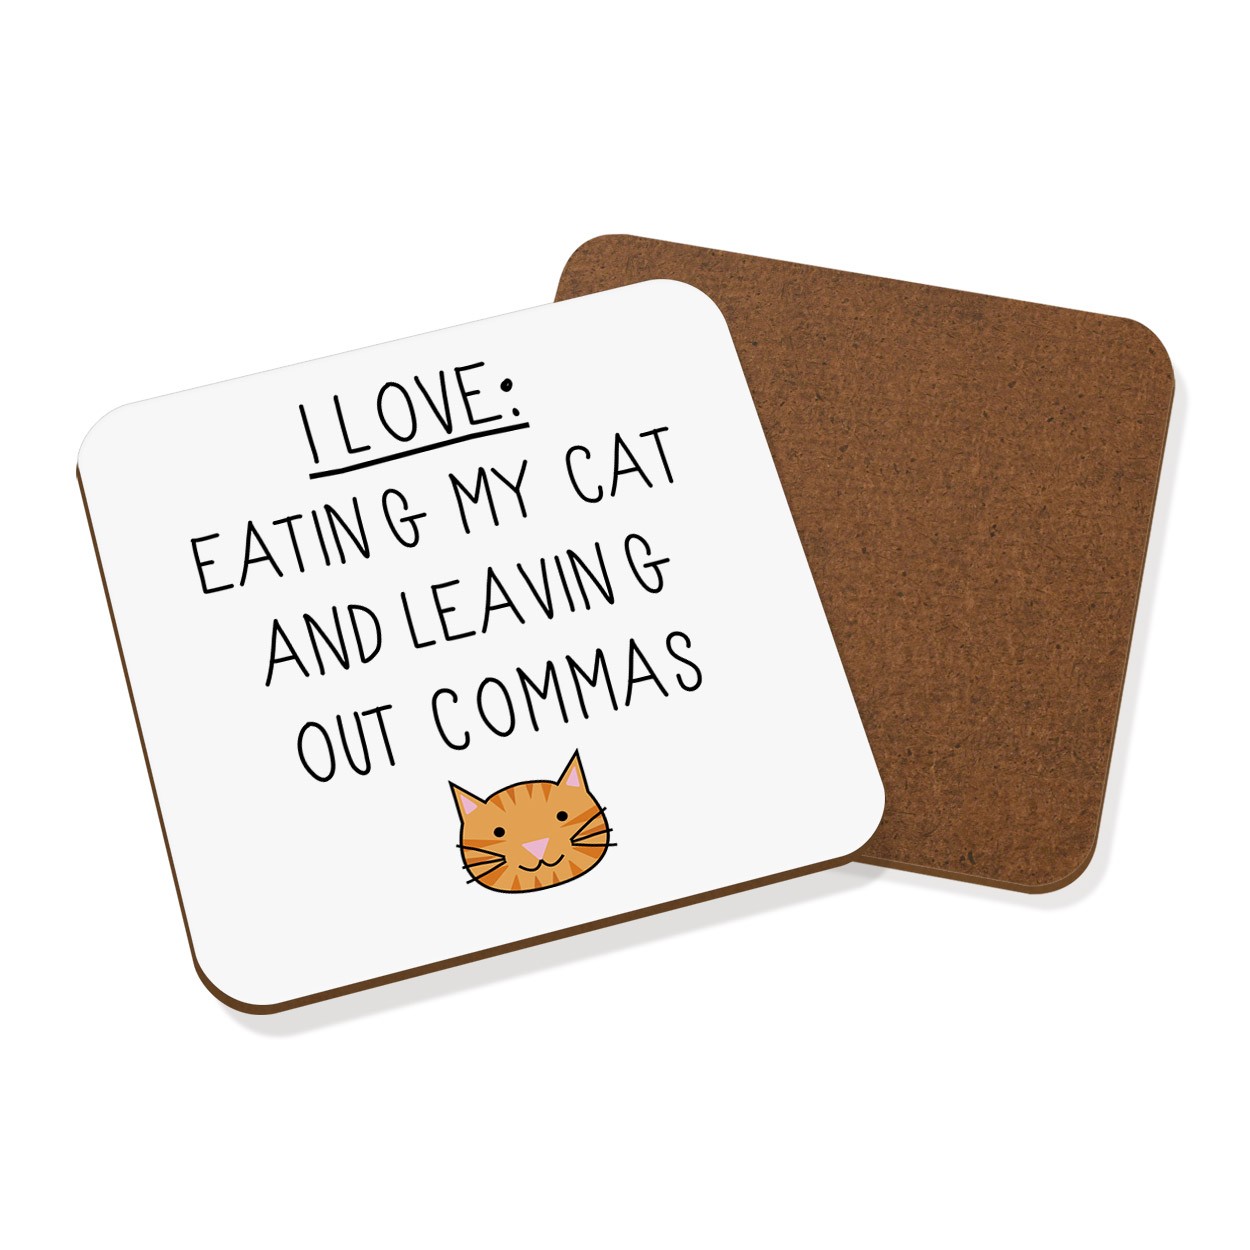 I Love Eating My Cat and Leaving Out Commas Coaster Drinks Mat